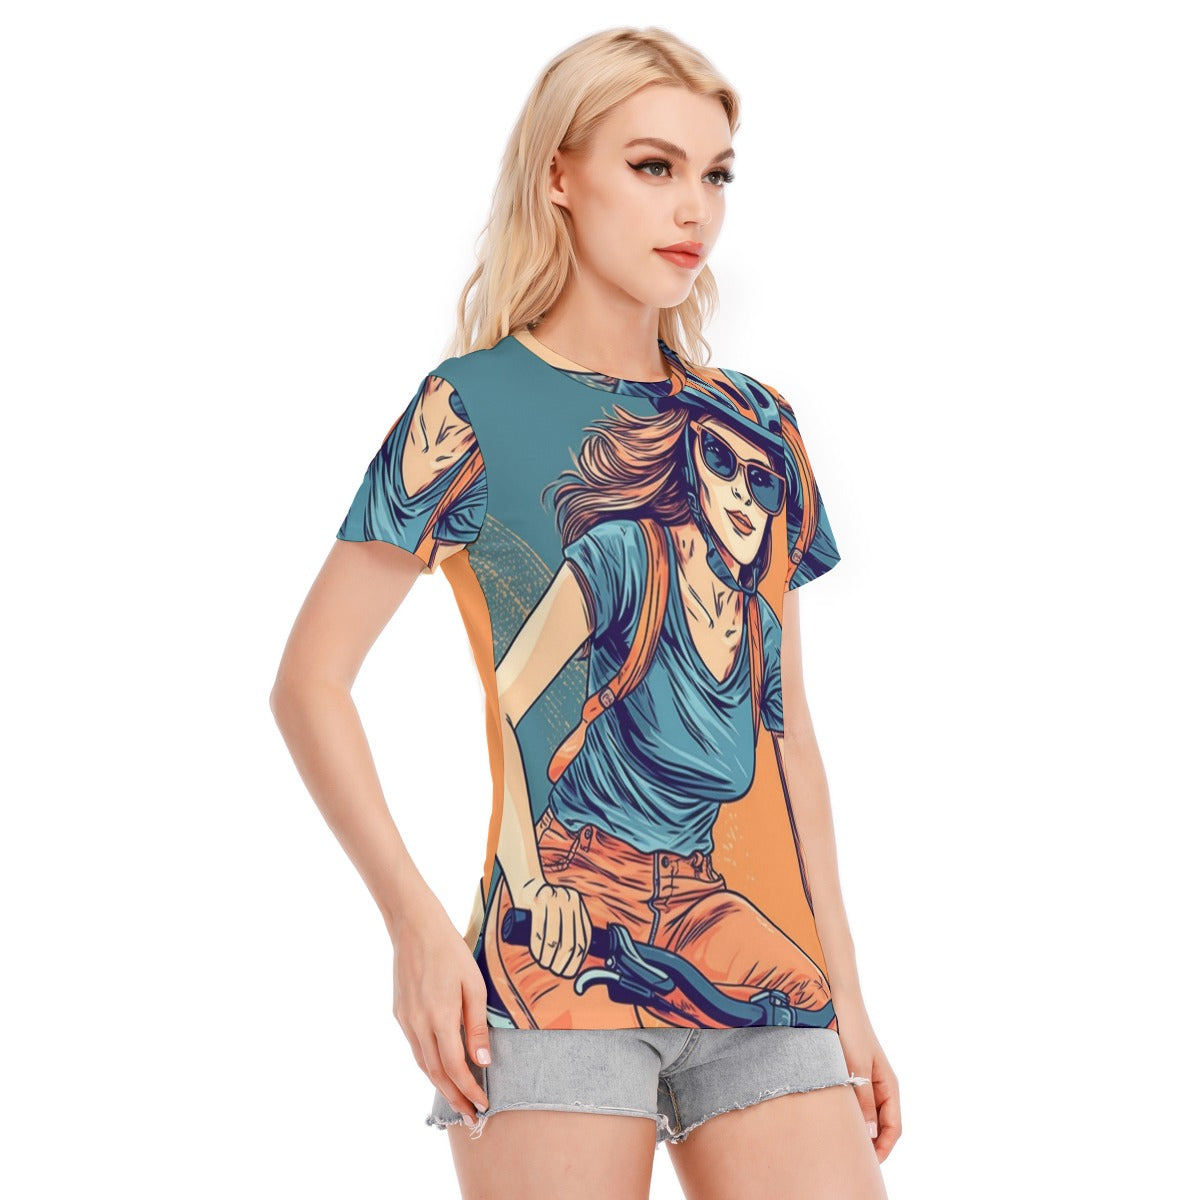 All-Over Print Women's Round Neck T-Shirt | 190GSM Cotton